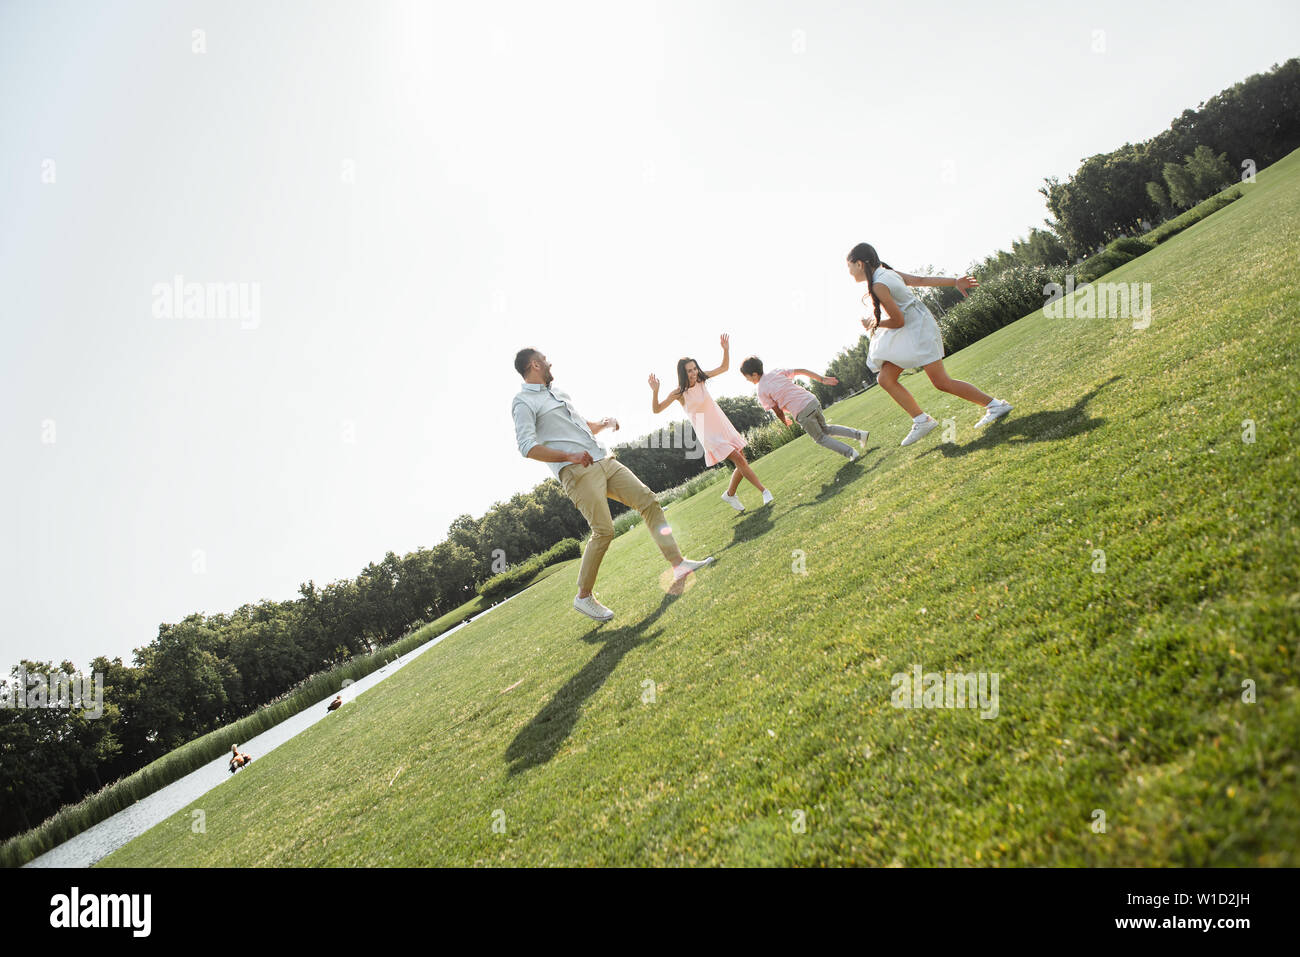 We love playing together Active and happy young family playing and smiling while spending free time outdoors in park. Picnic. Weekend Stock Photo